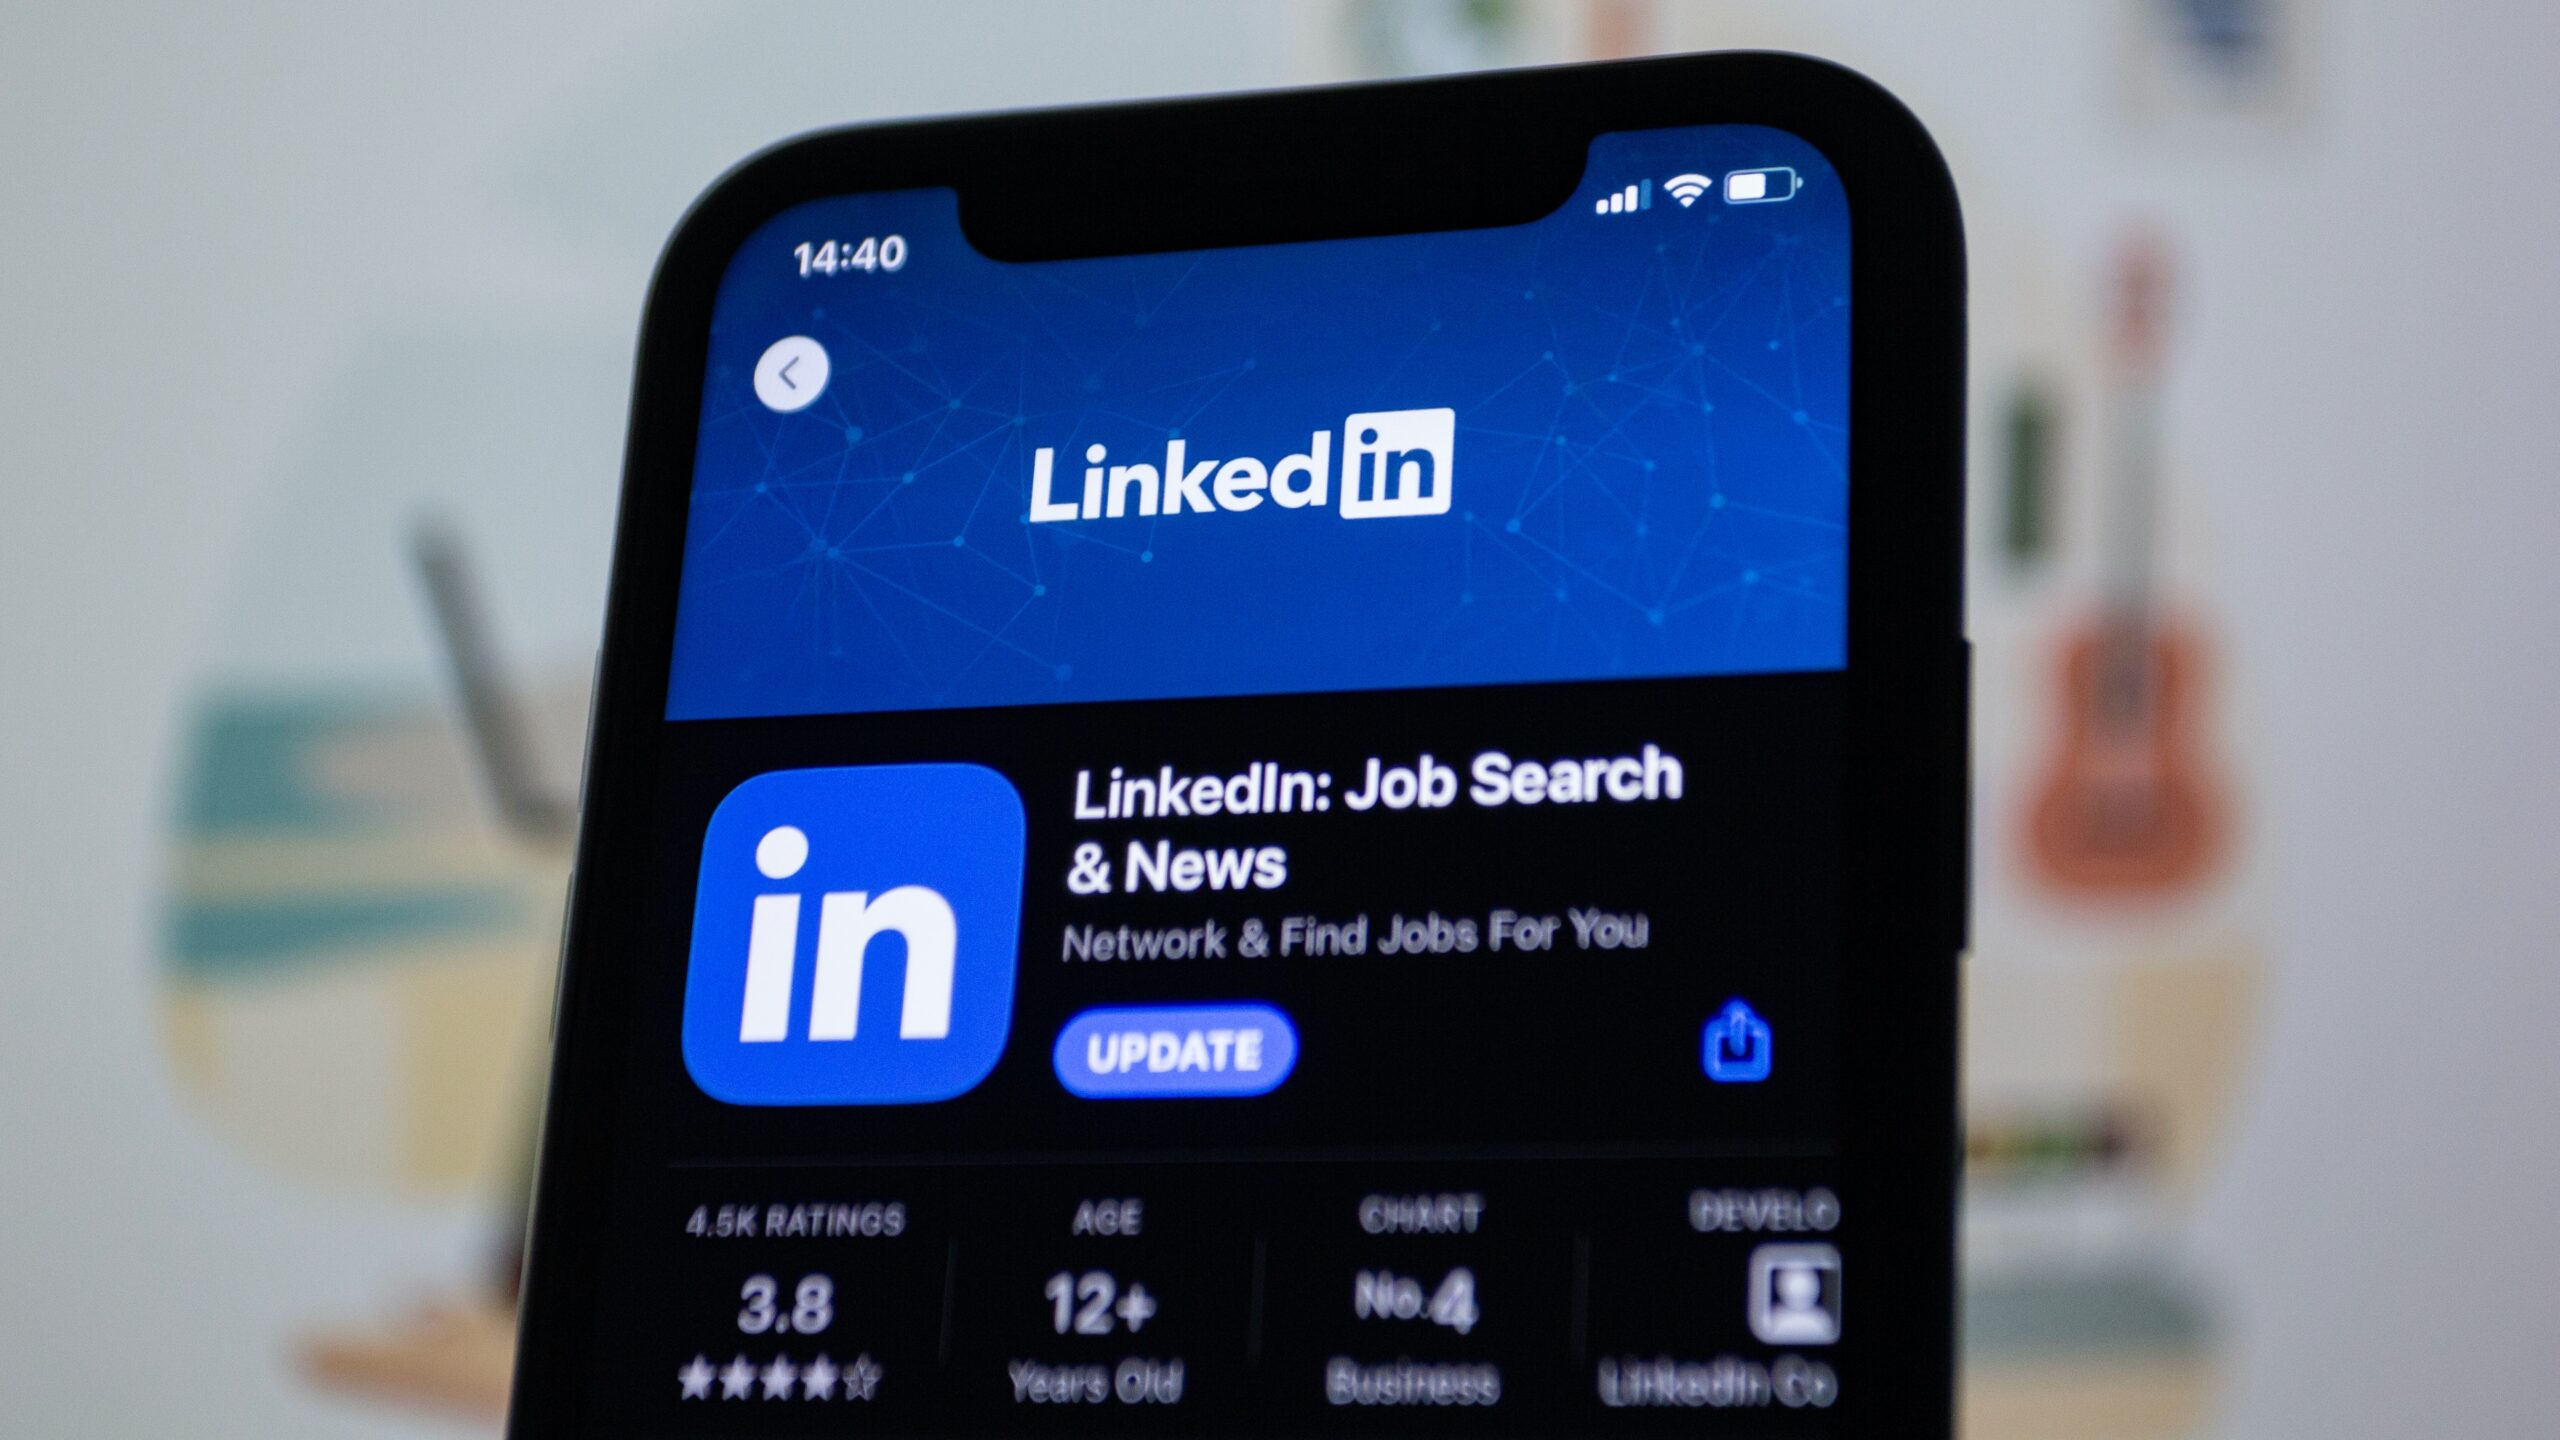 How To Promote Your Business With LinkedIn